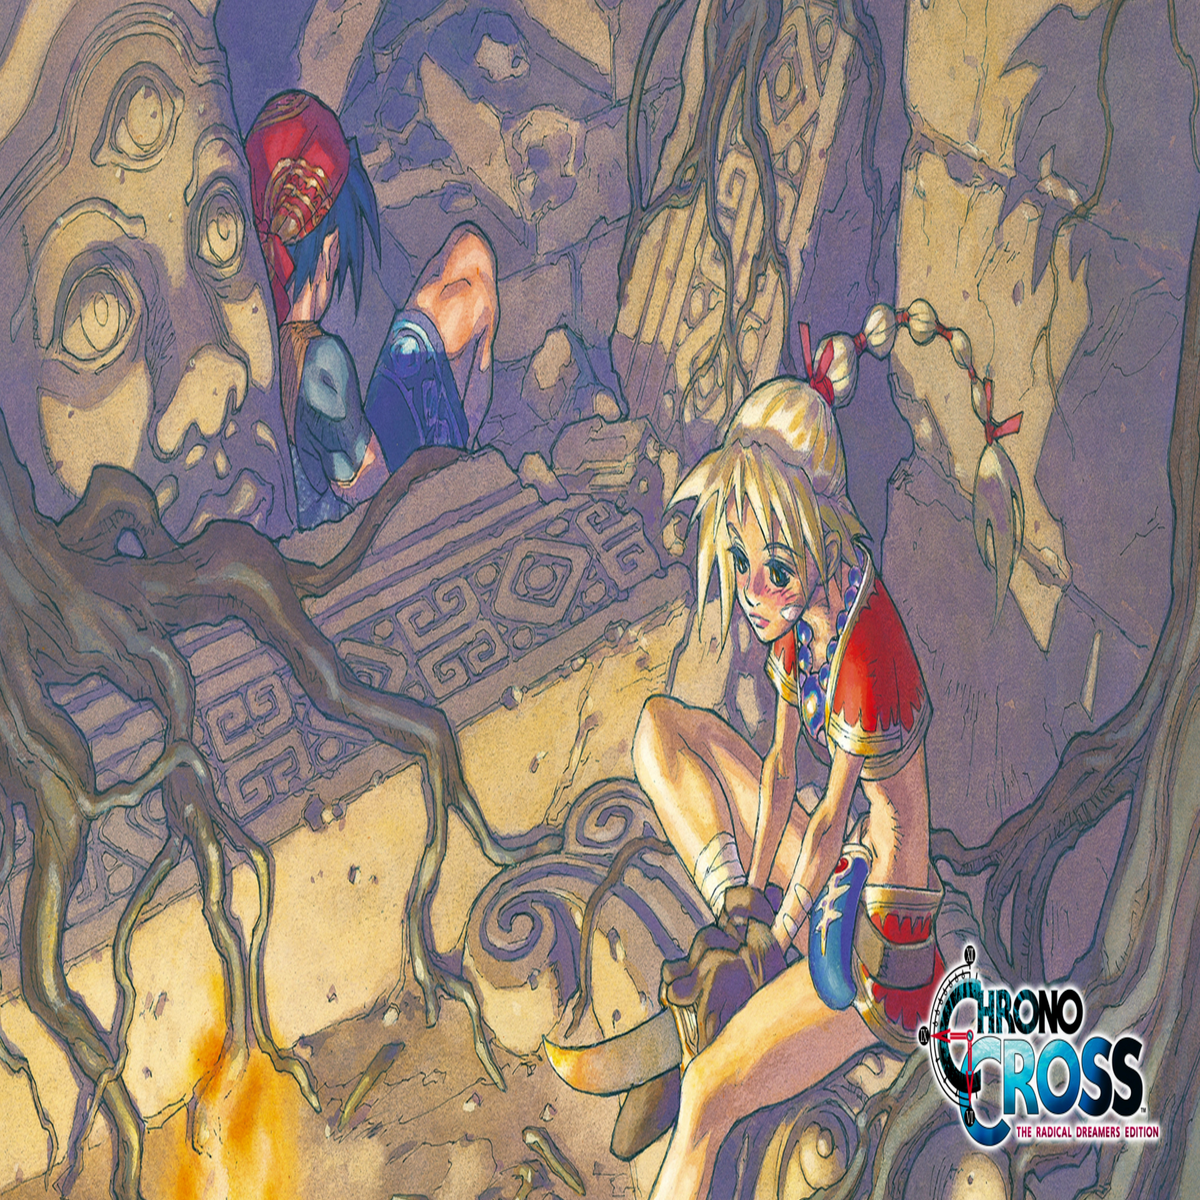 The upcoming 'big PlayStation remake' is reportedly Chrono Cross